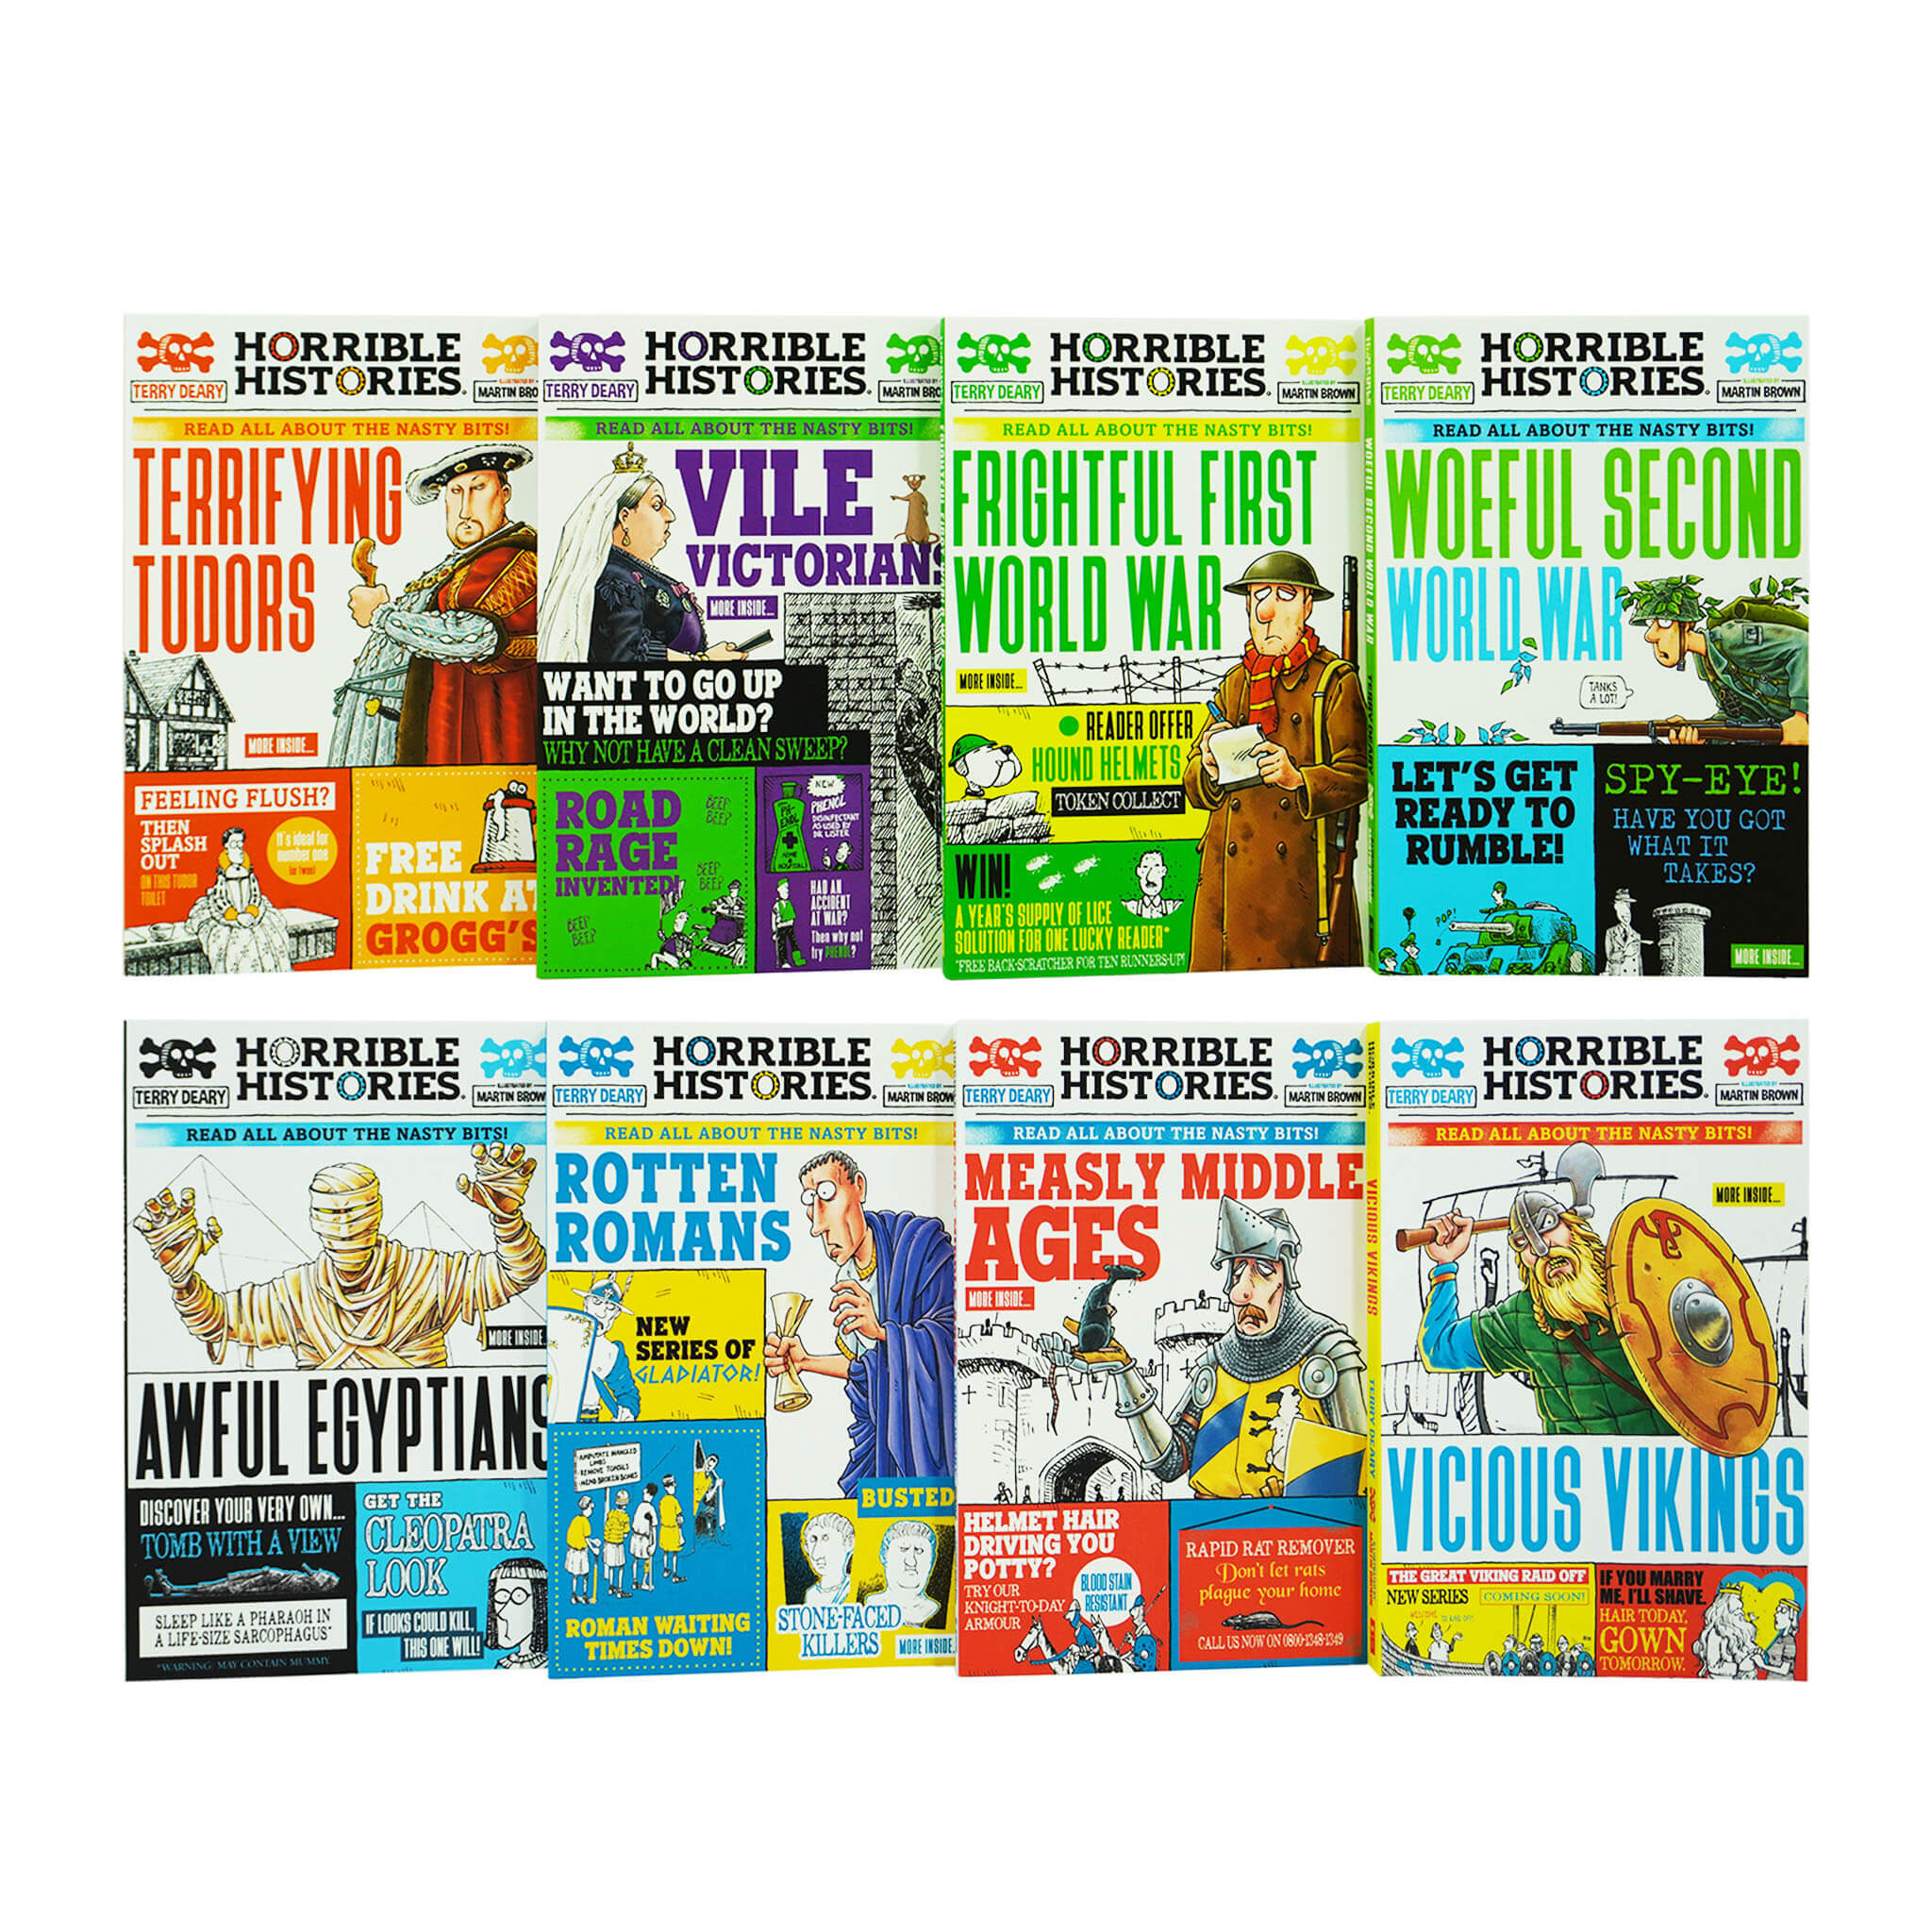 Horrible Histories Savage By Terry Deary 8 Book Collection Set  - Ages 7+ - Paperback